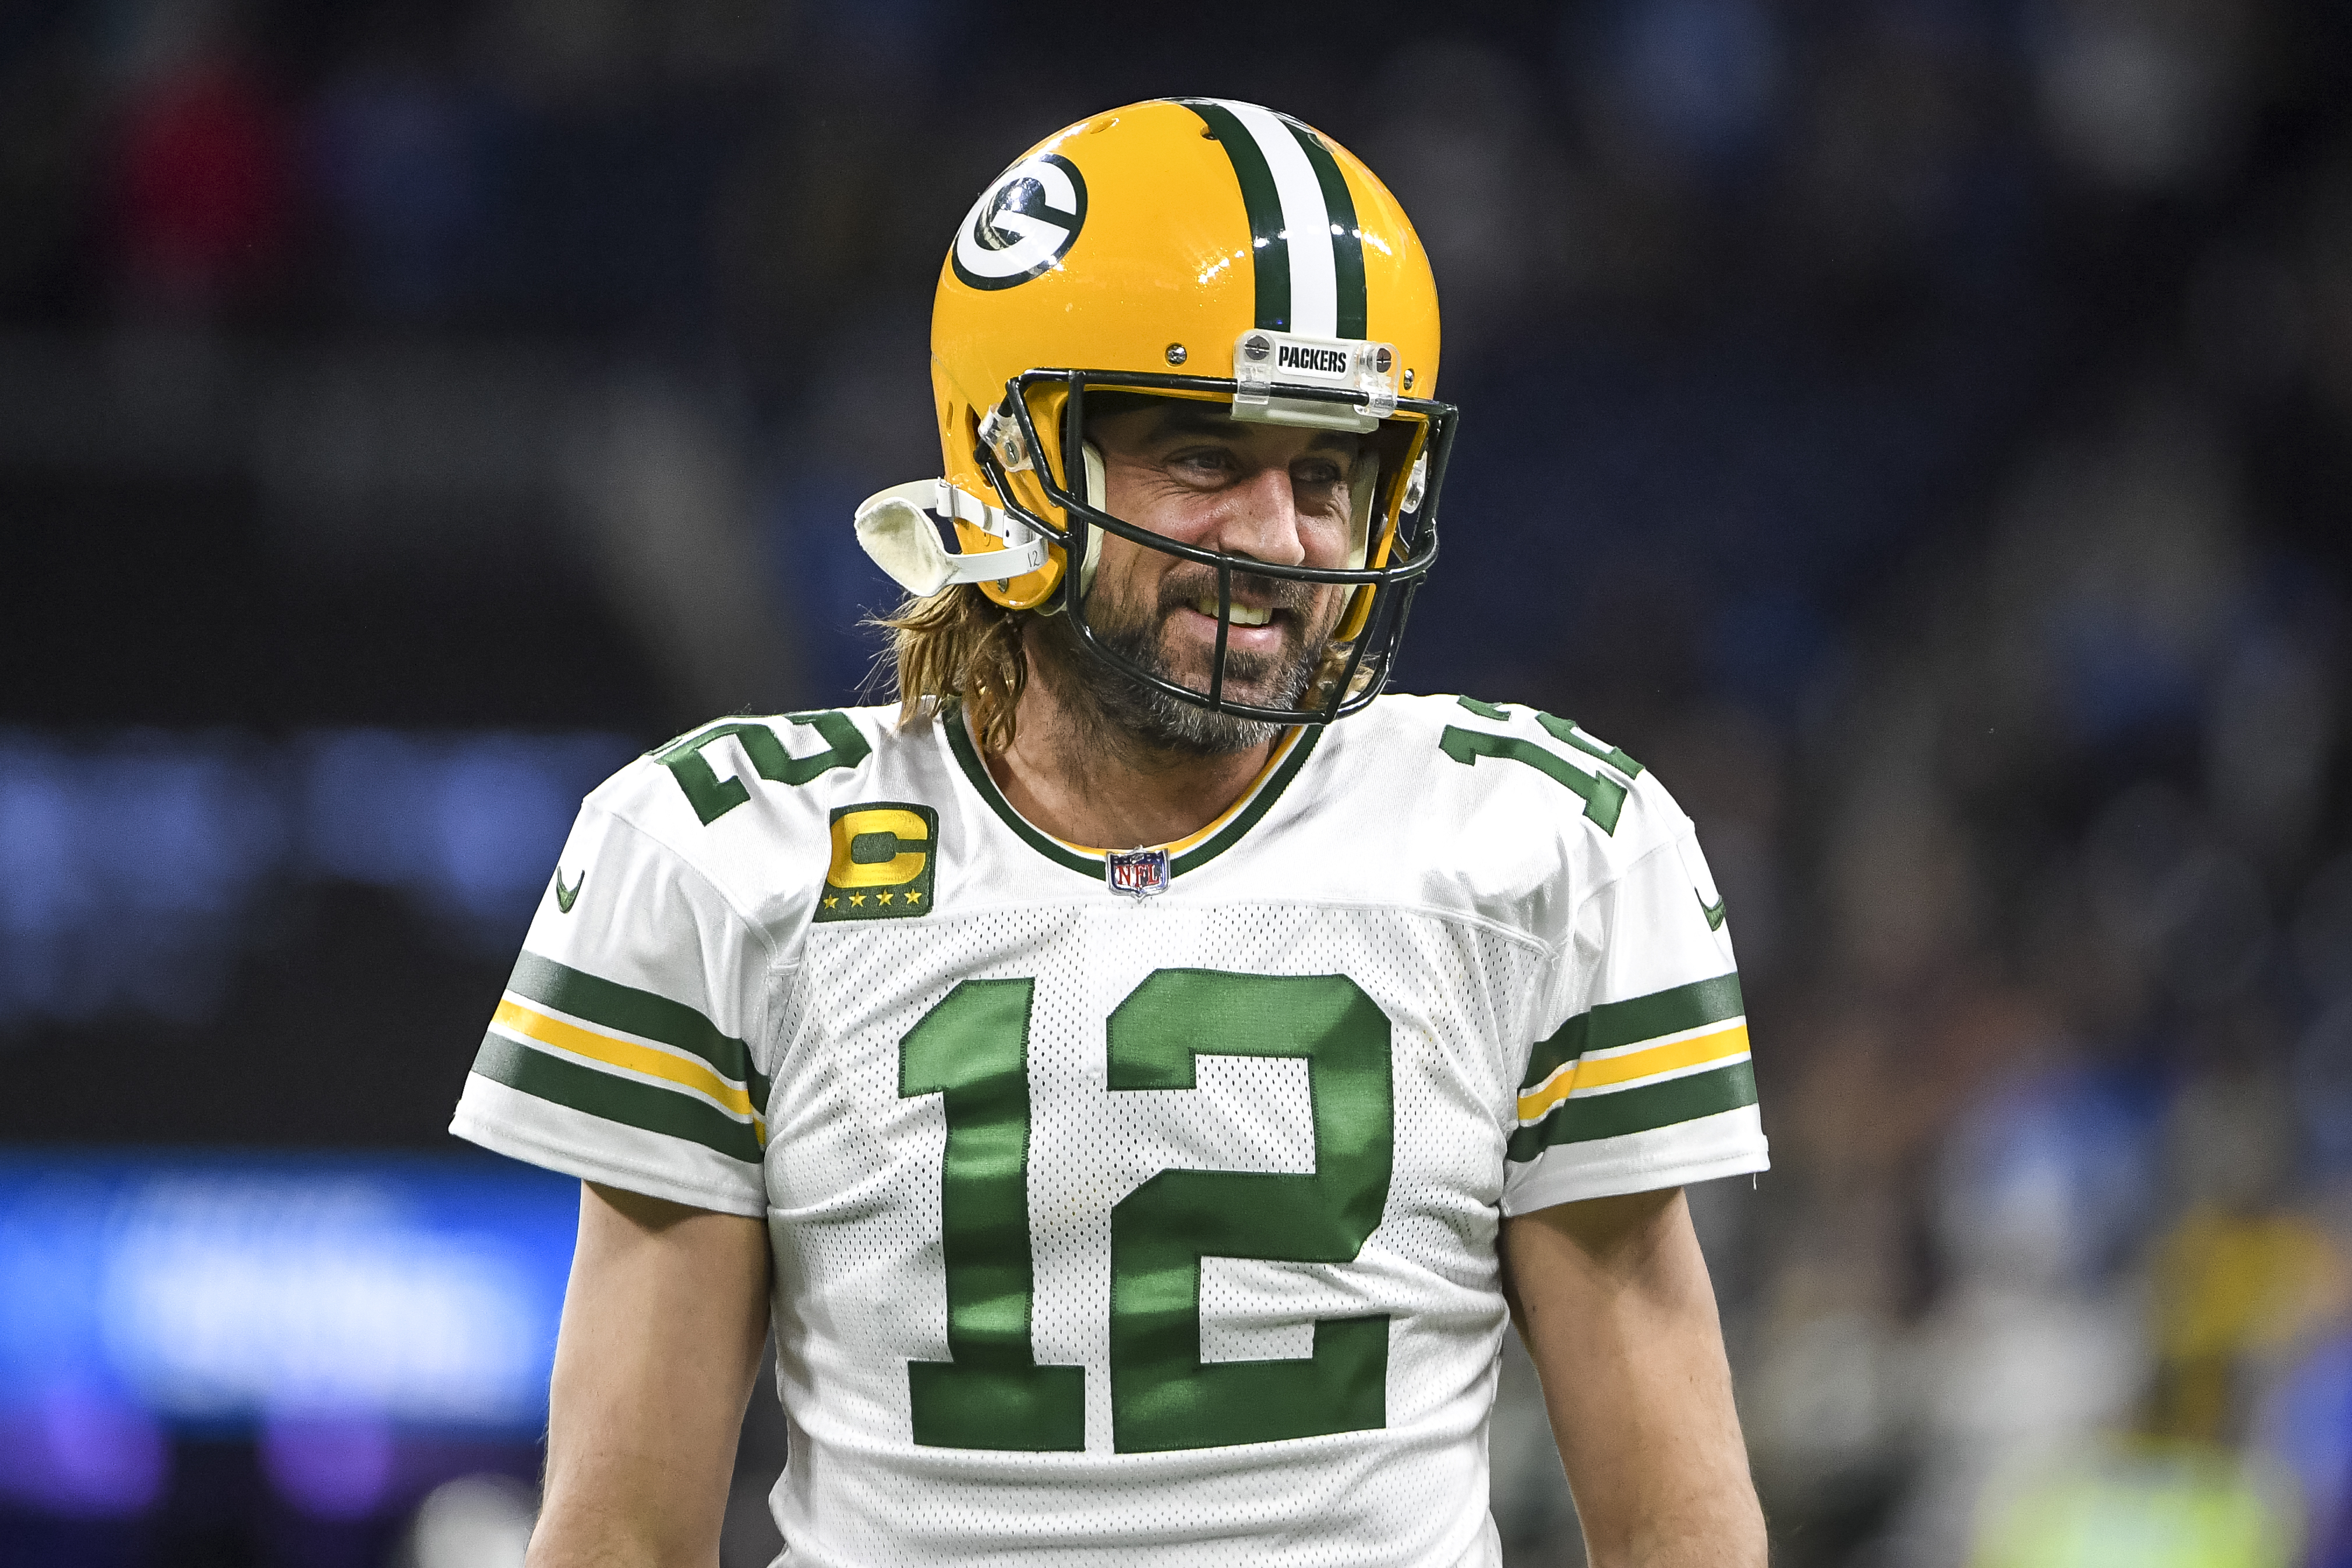 Packers Divisional Round Schedule: Green Bay Next Game Time, Date, TV Channel for 2022 NFL Playoffs